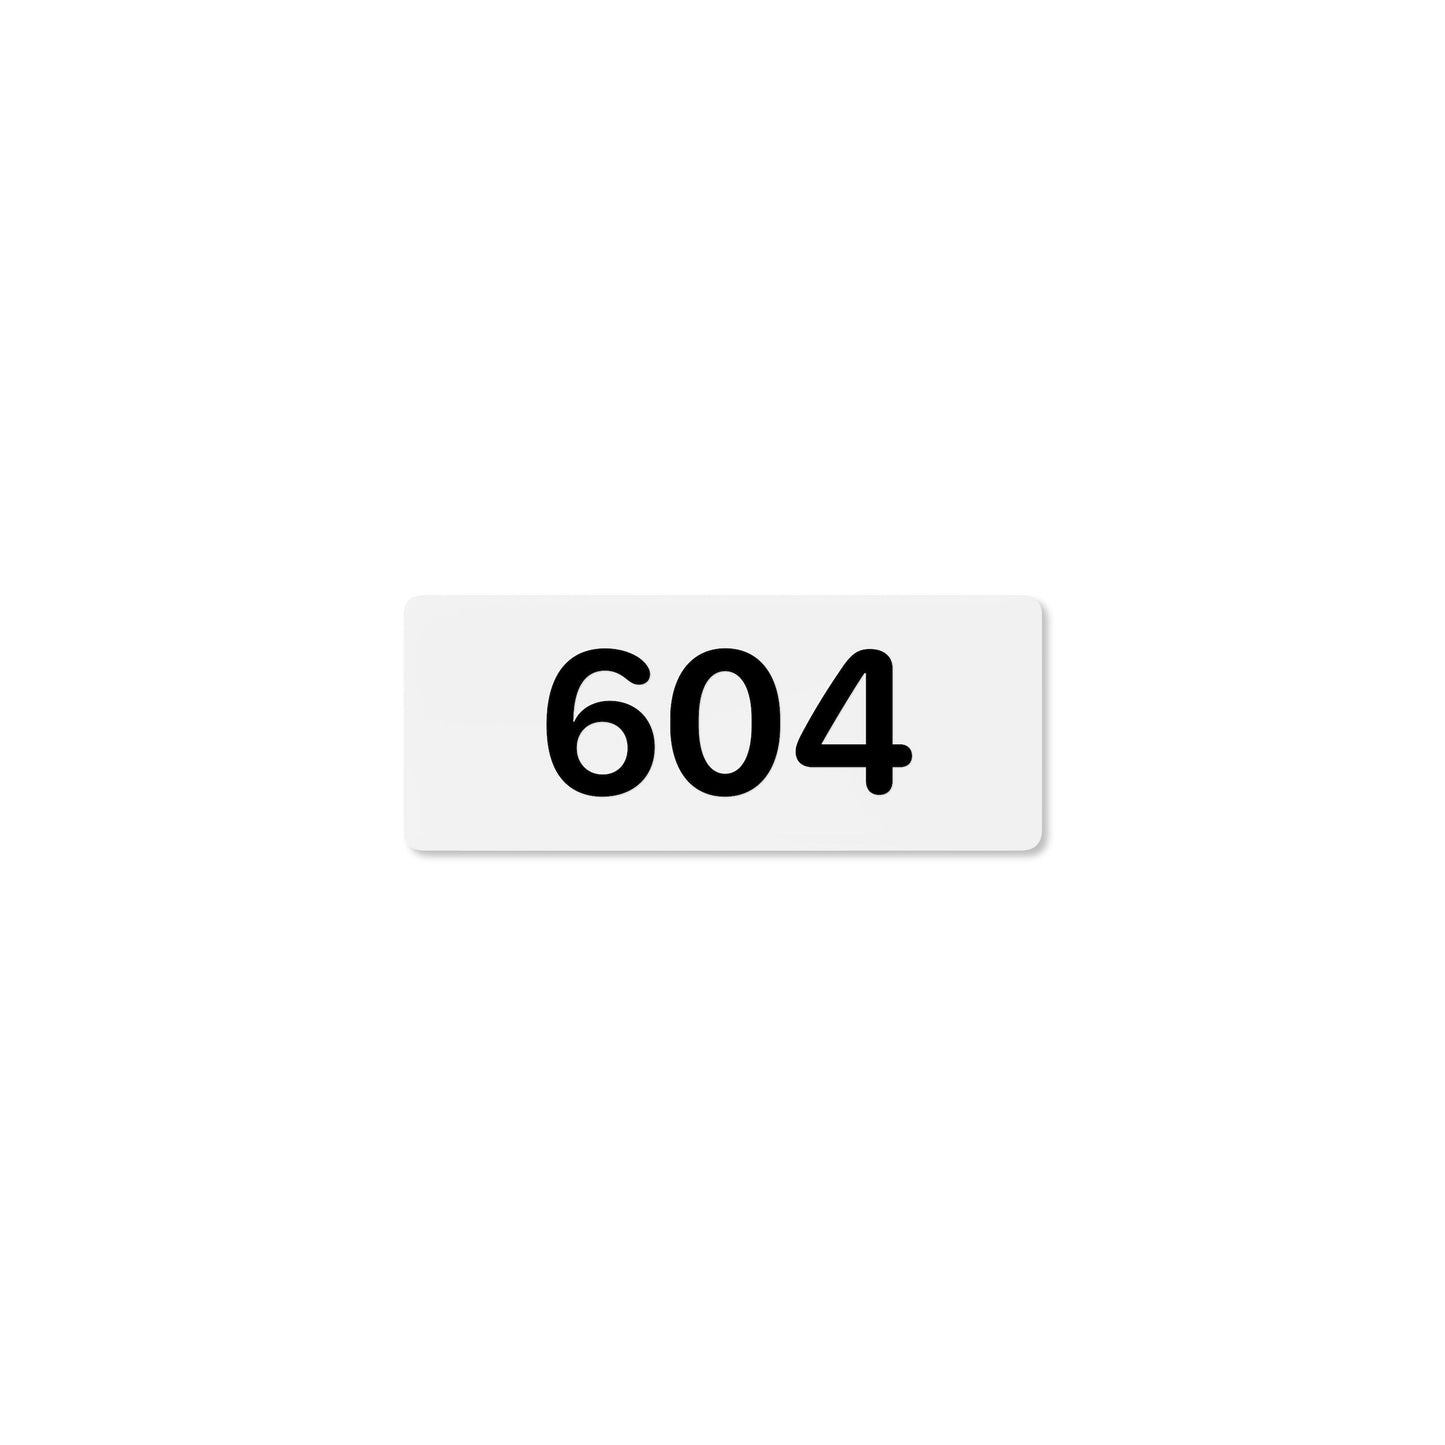 Numeral 604